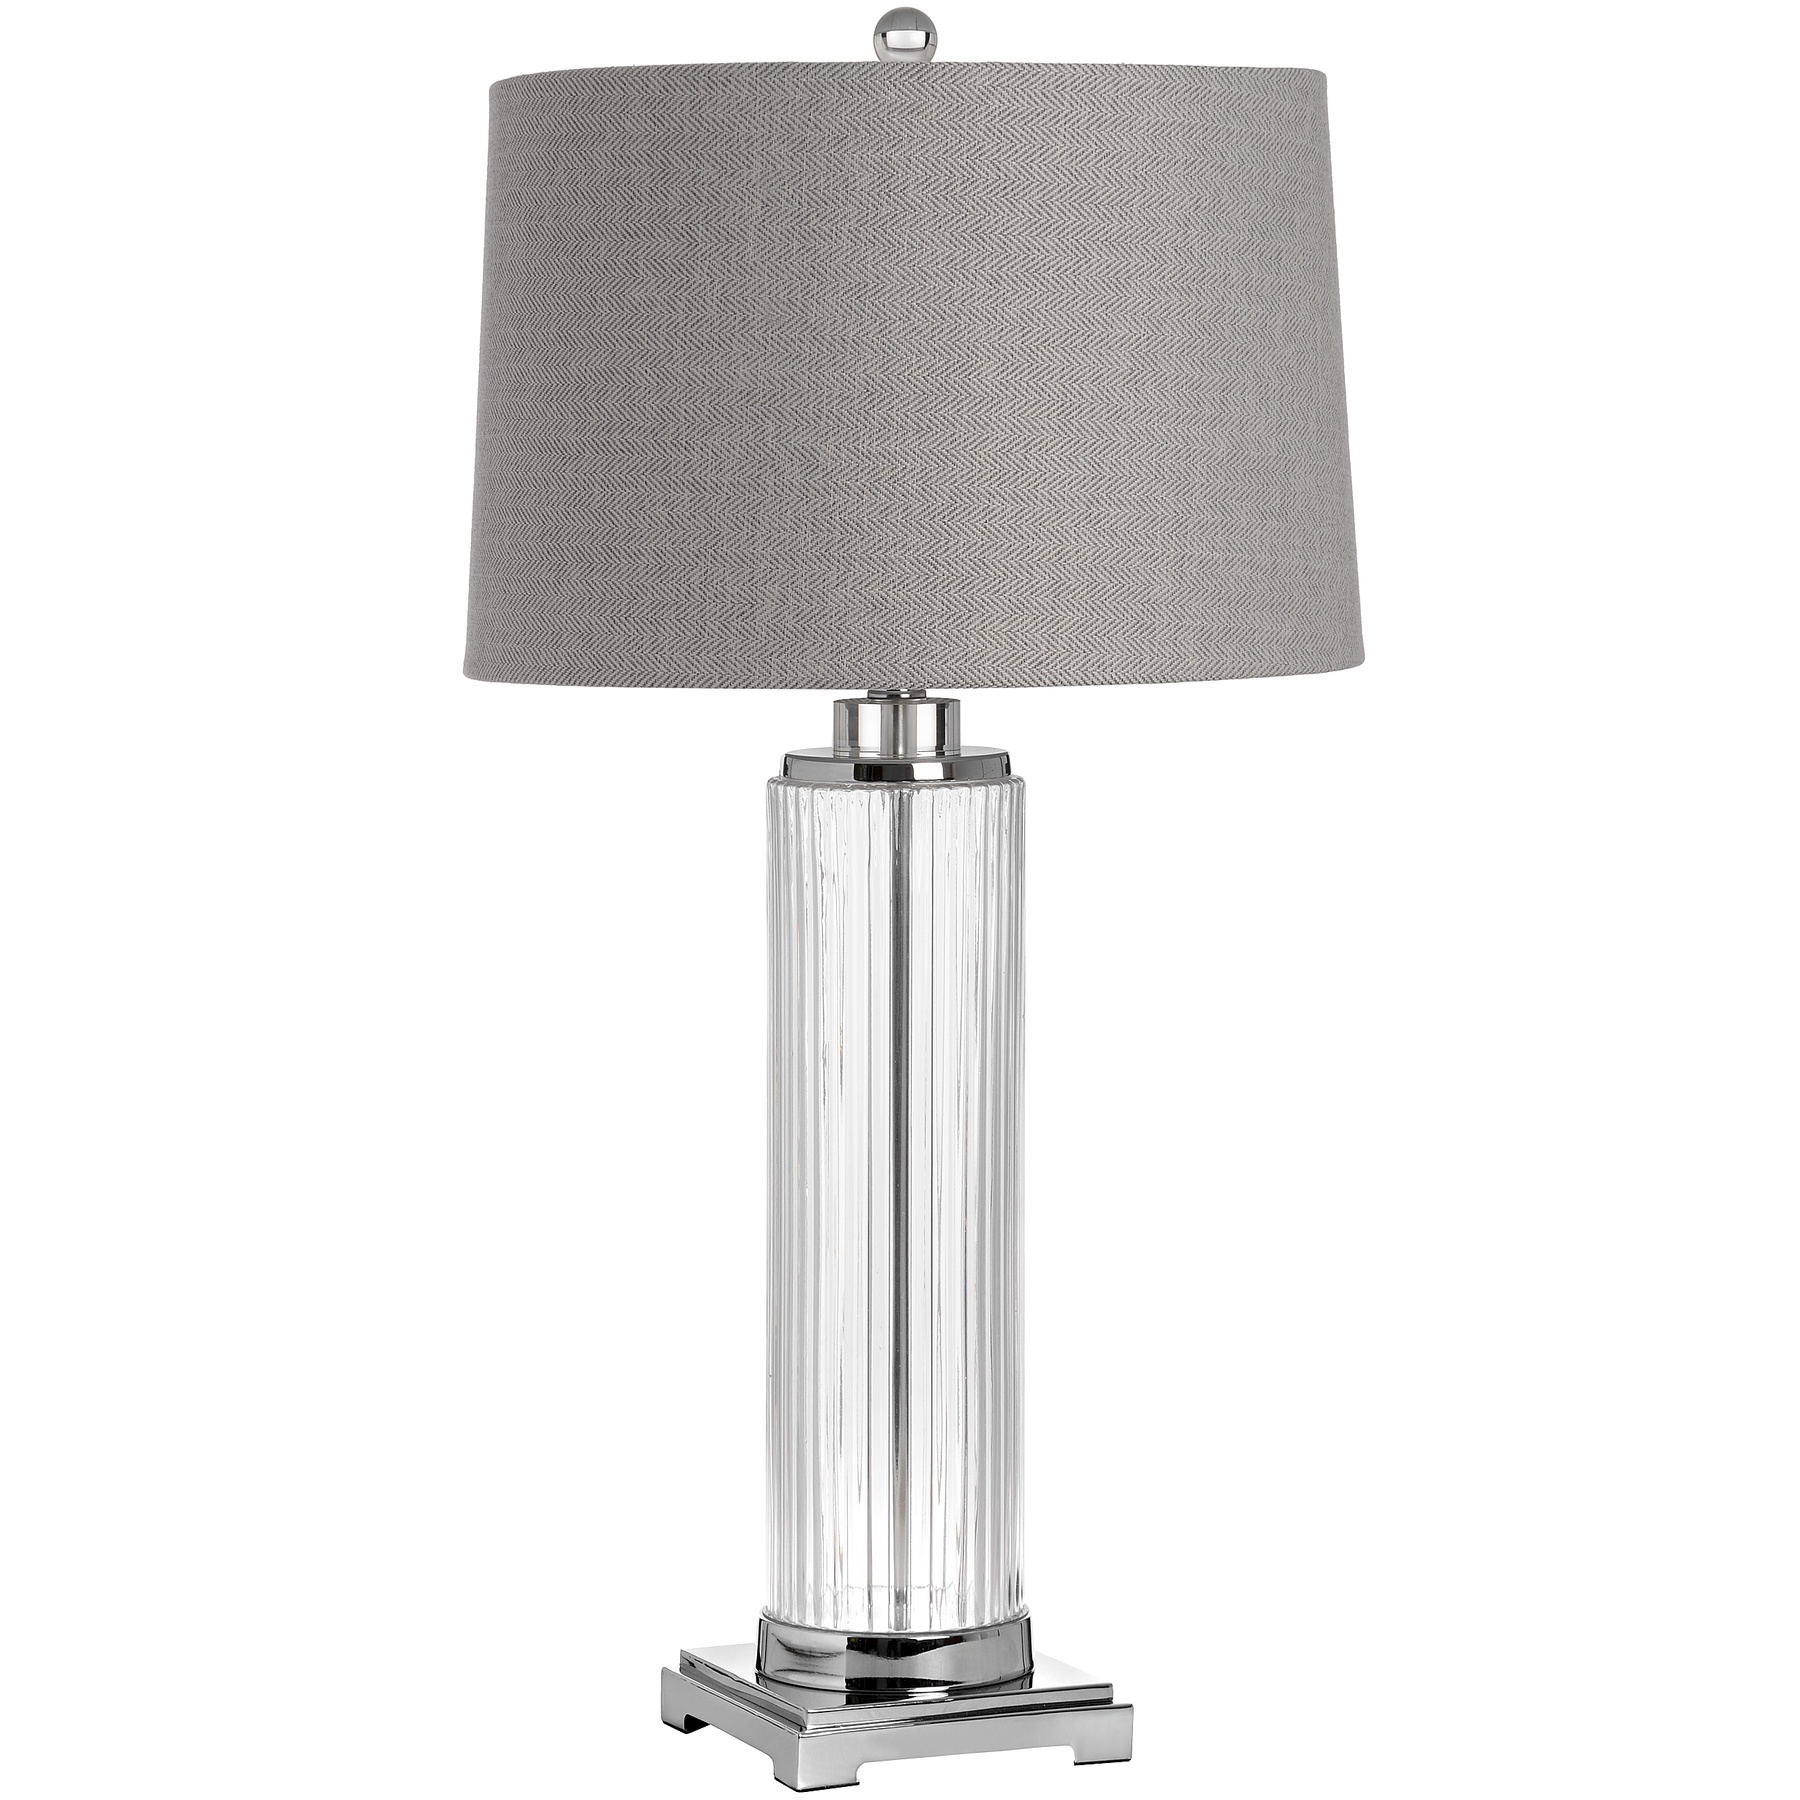 Roma Glass Table Lamp - Image 1